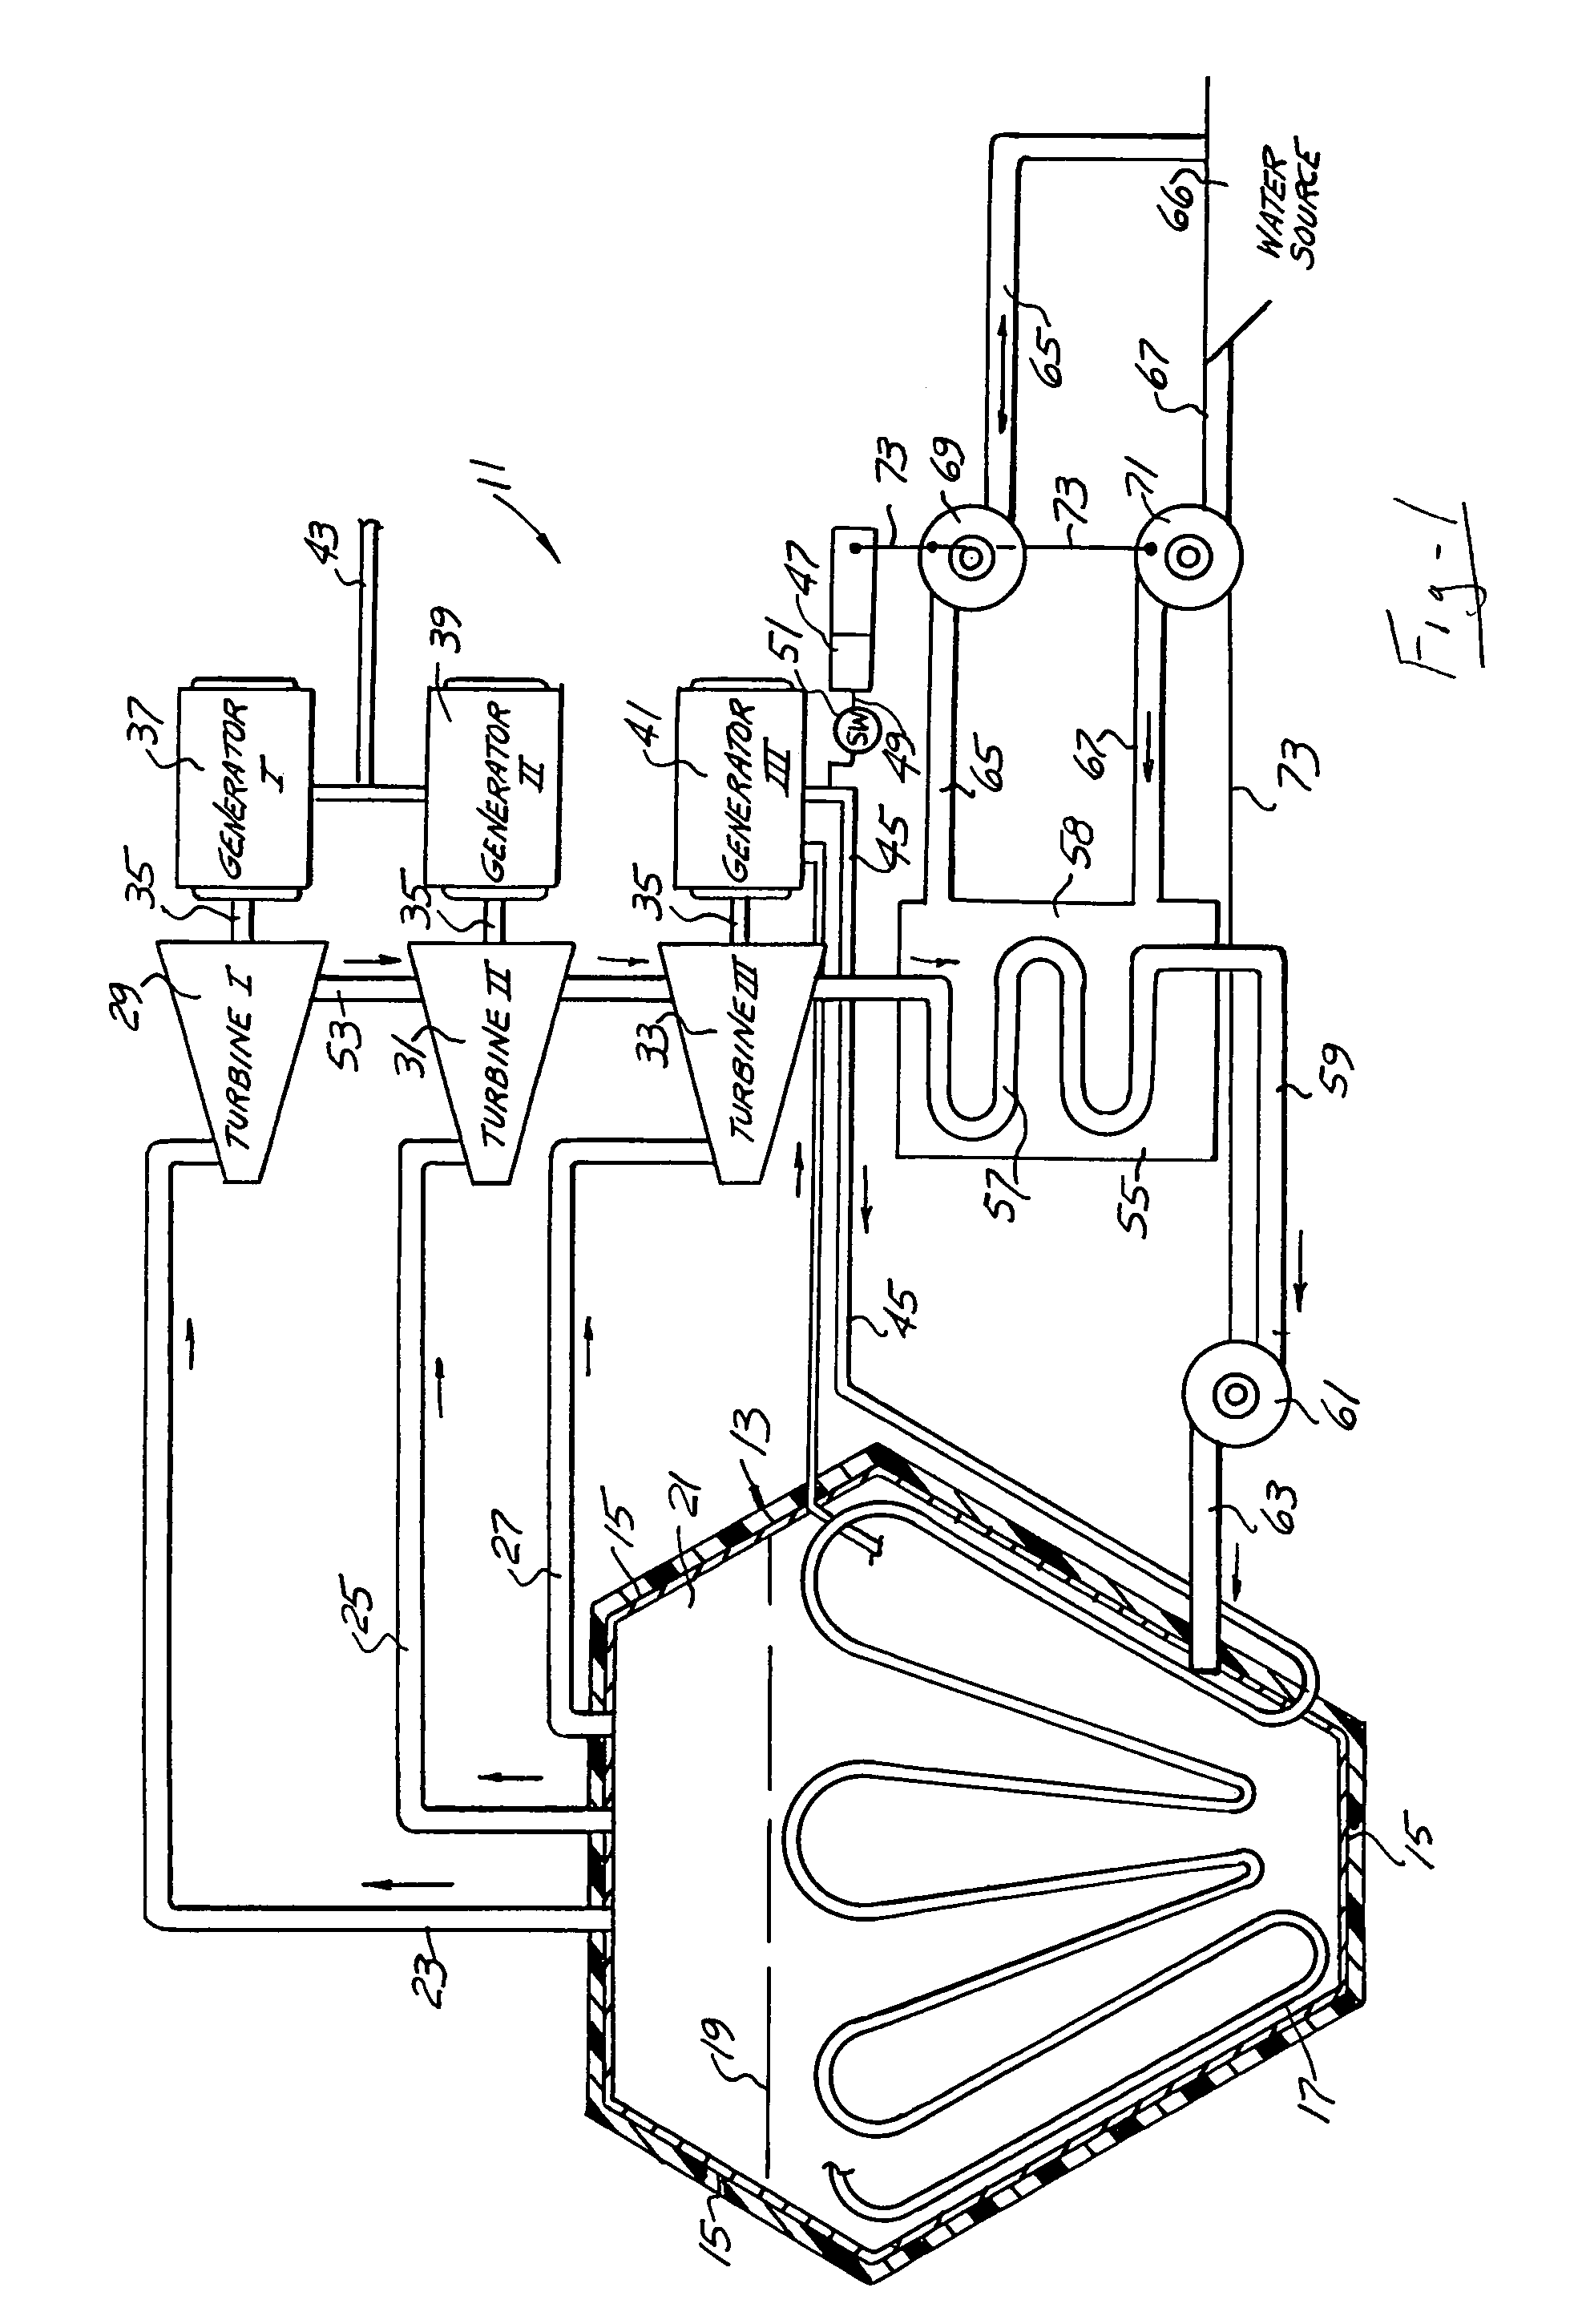 Electro-water reactor steam powered electric generator system